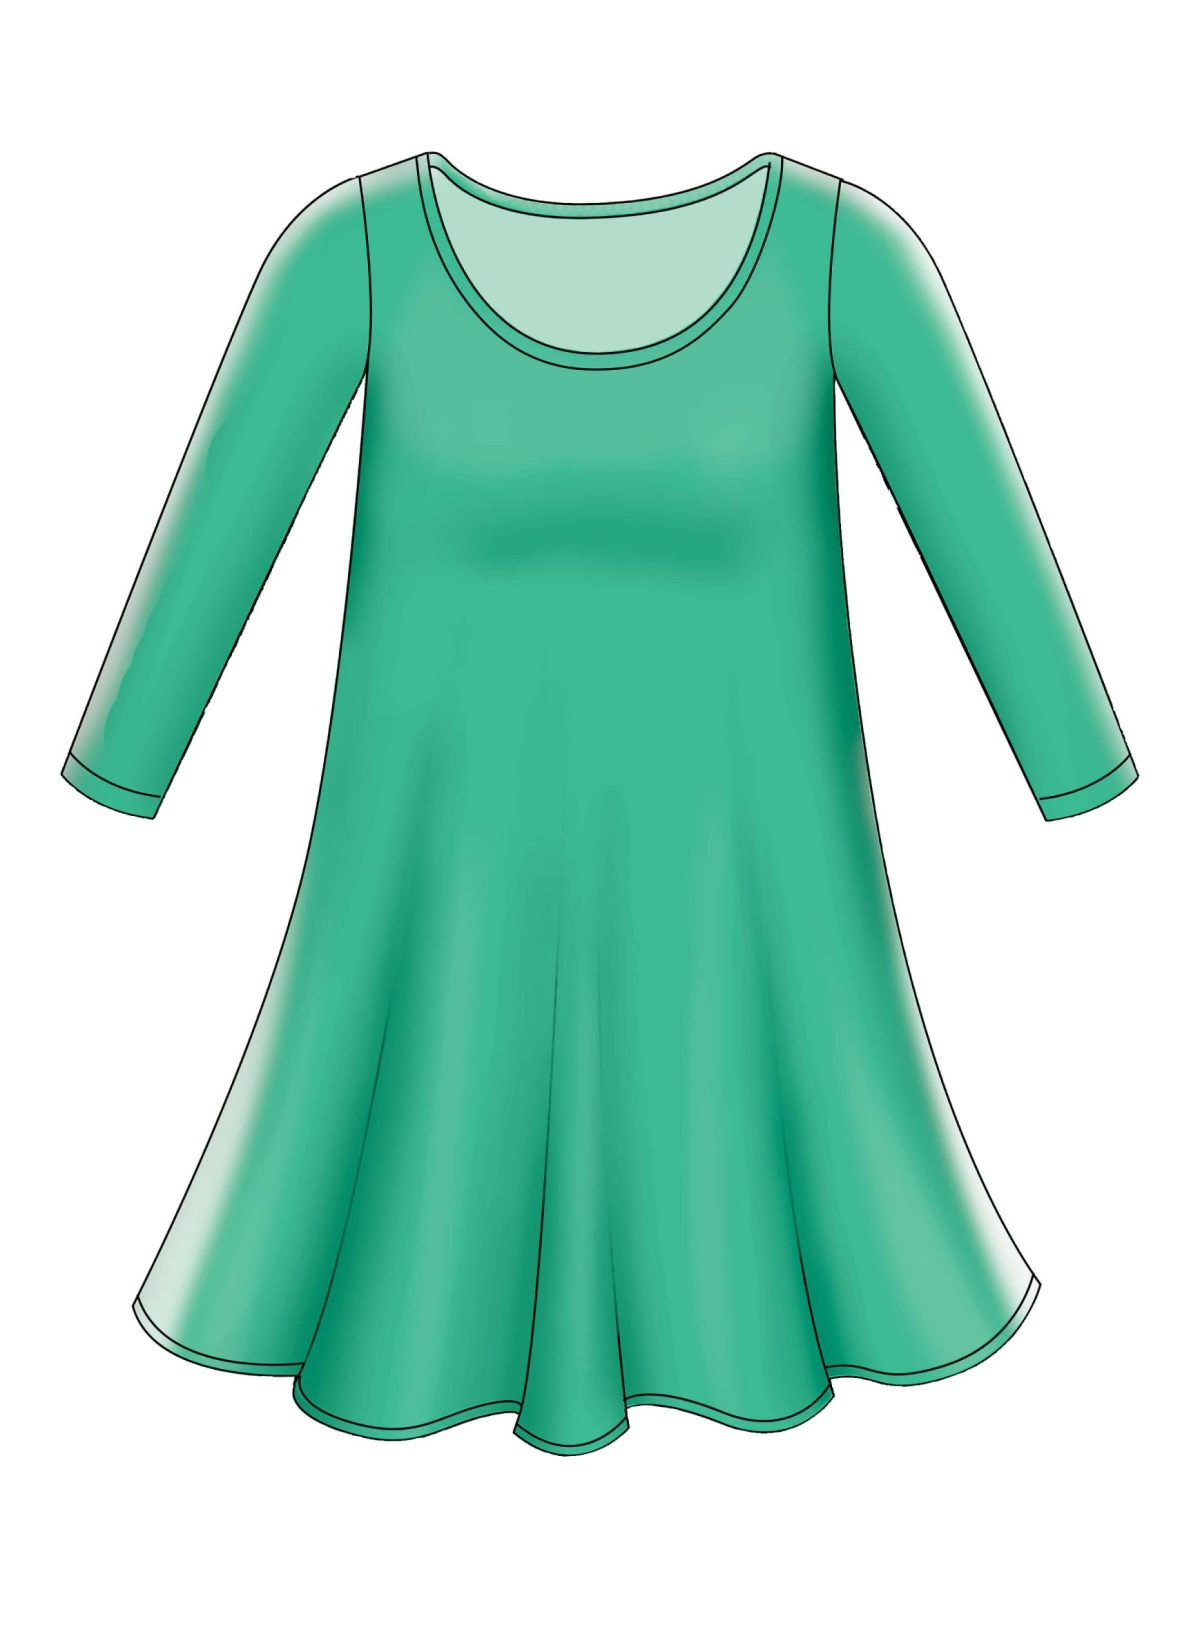 McCall's Sewing Pattern M7622 Misses' Knit Swing Dresses with Neckline and Sleeve Variations